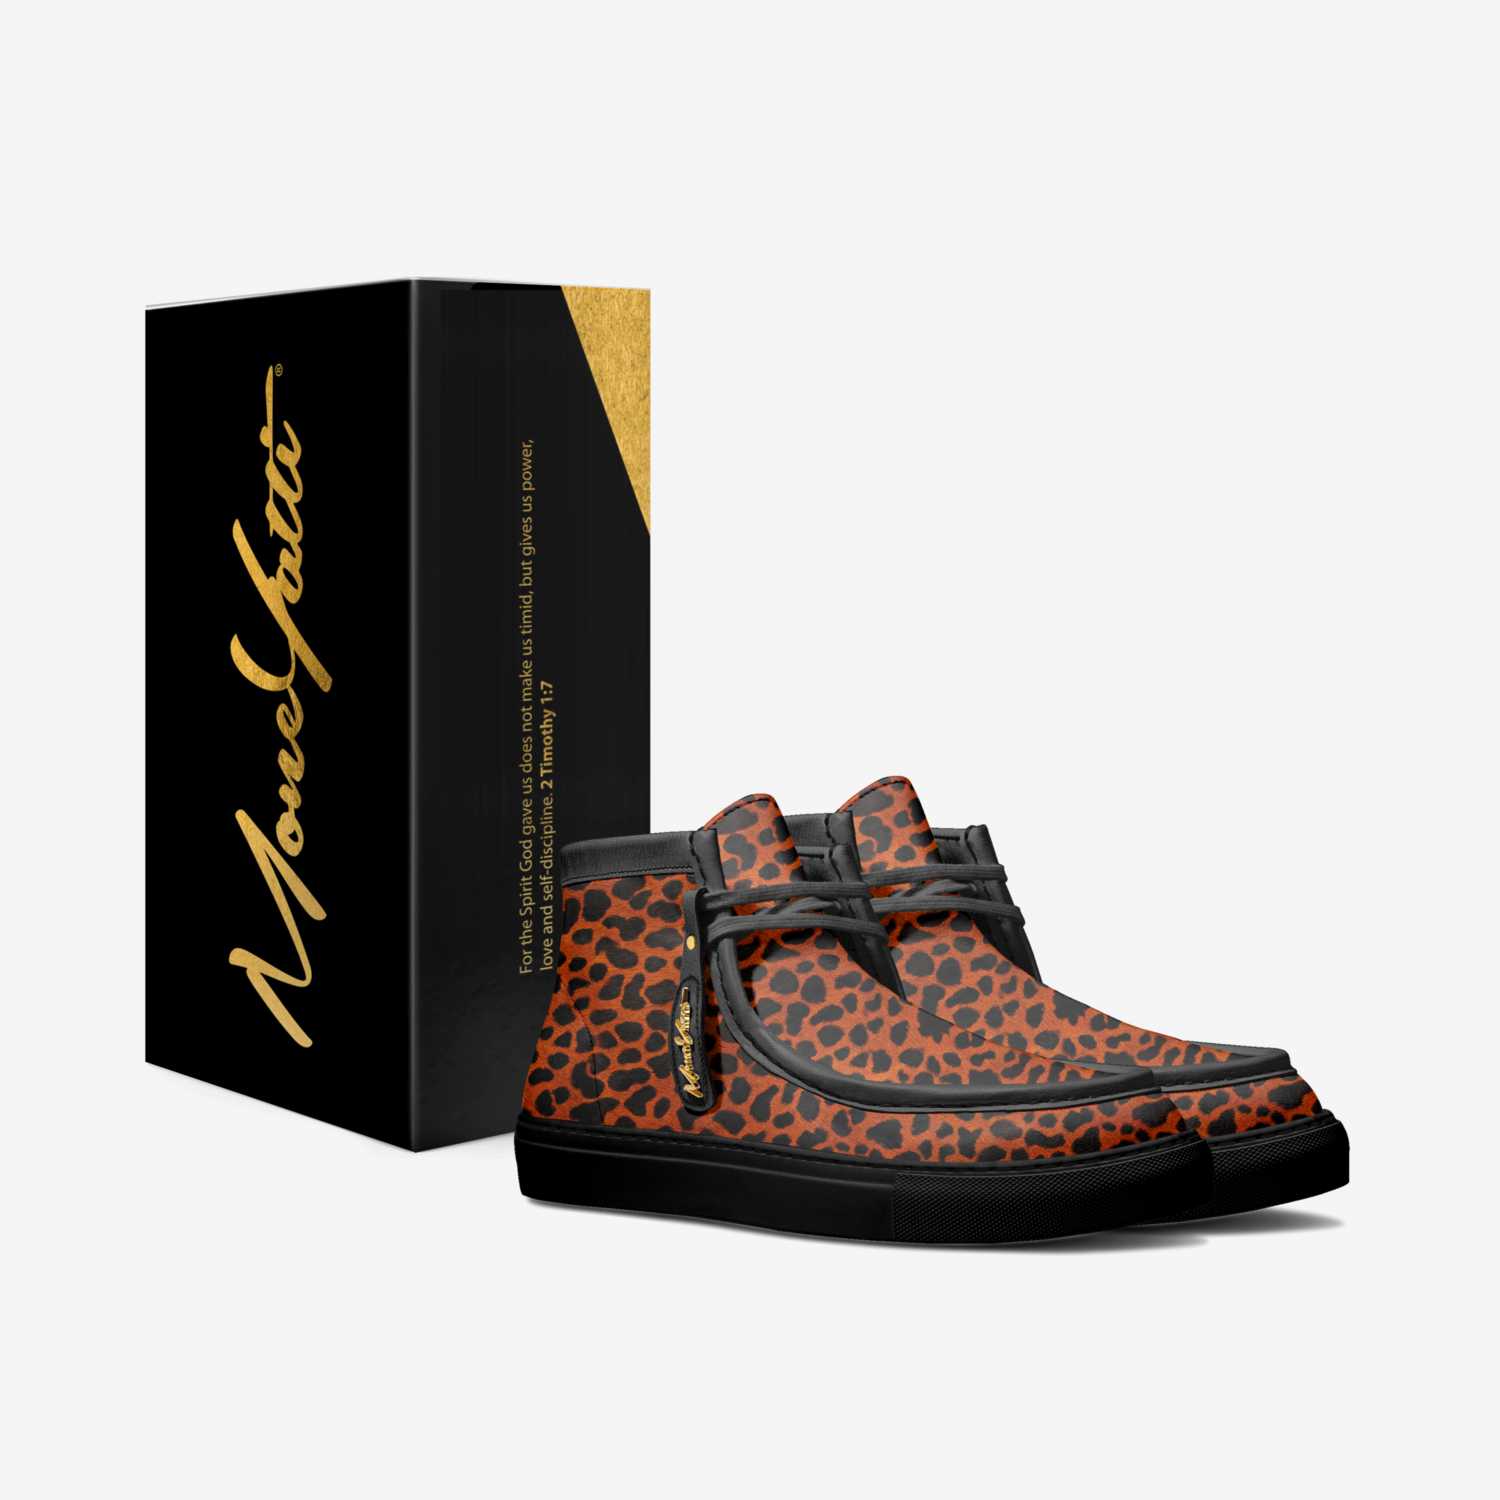 LUX 026 custom made in Italy shoes by Moneyatti Brand | Box view